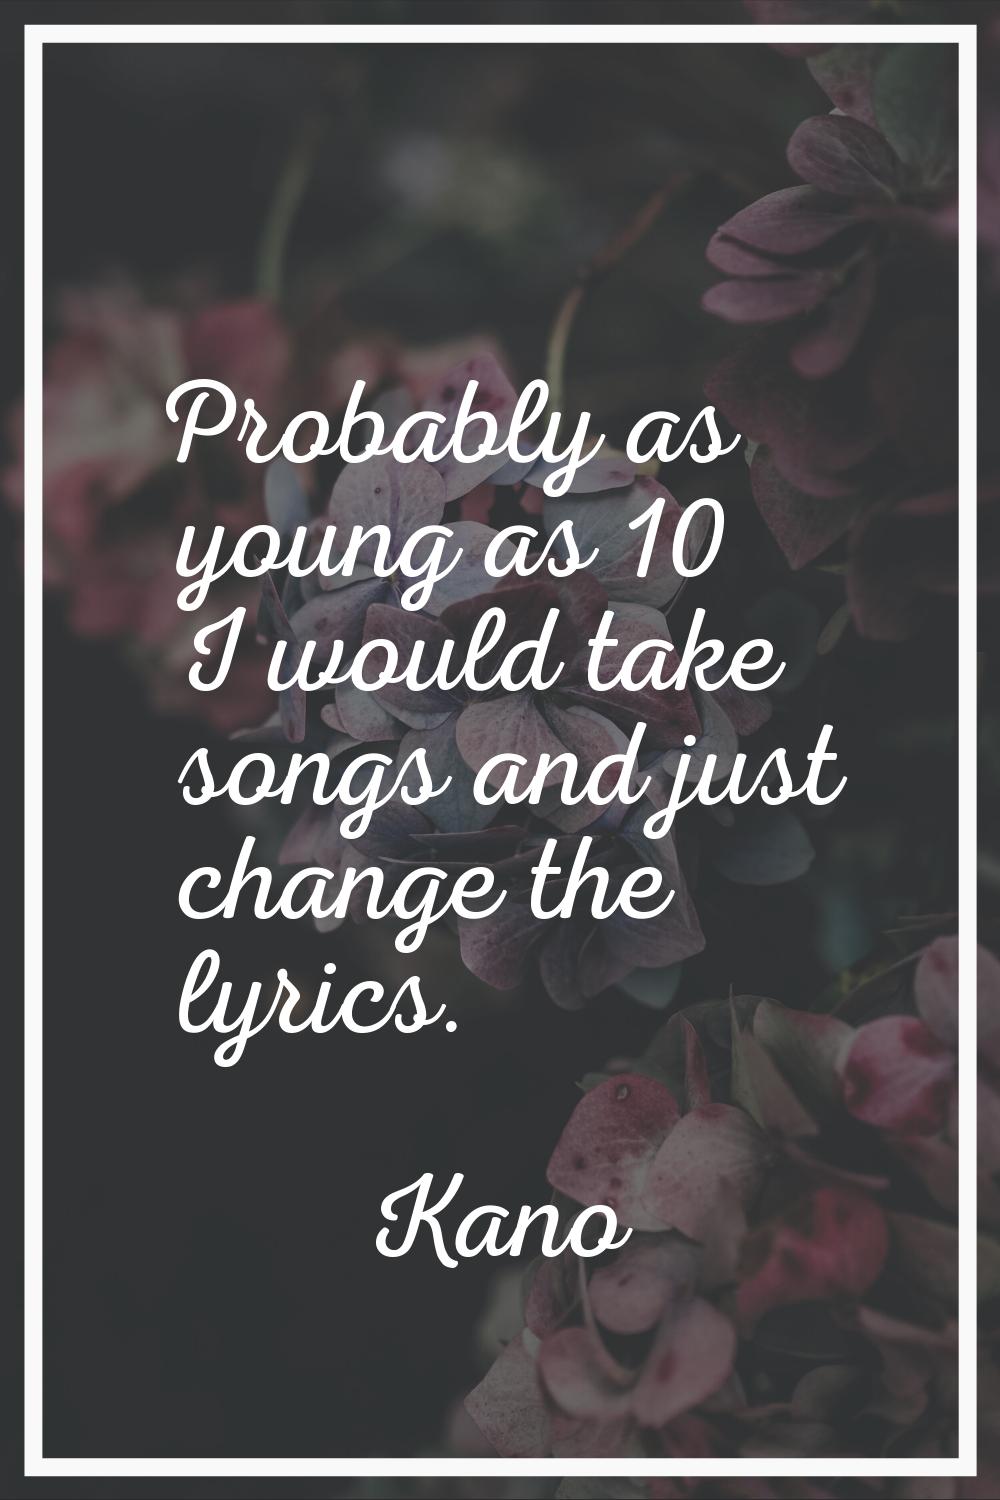 Probably as young as 10 I would take songs and just change the lyrics.